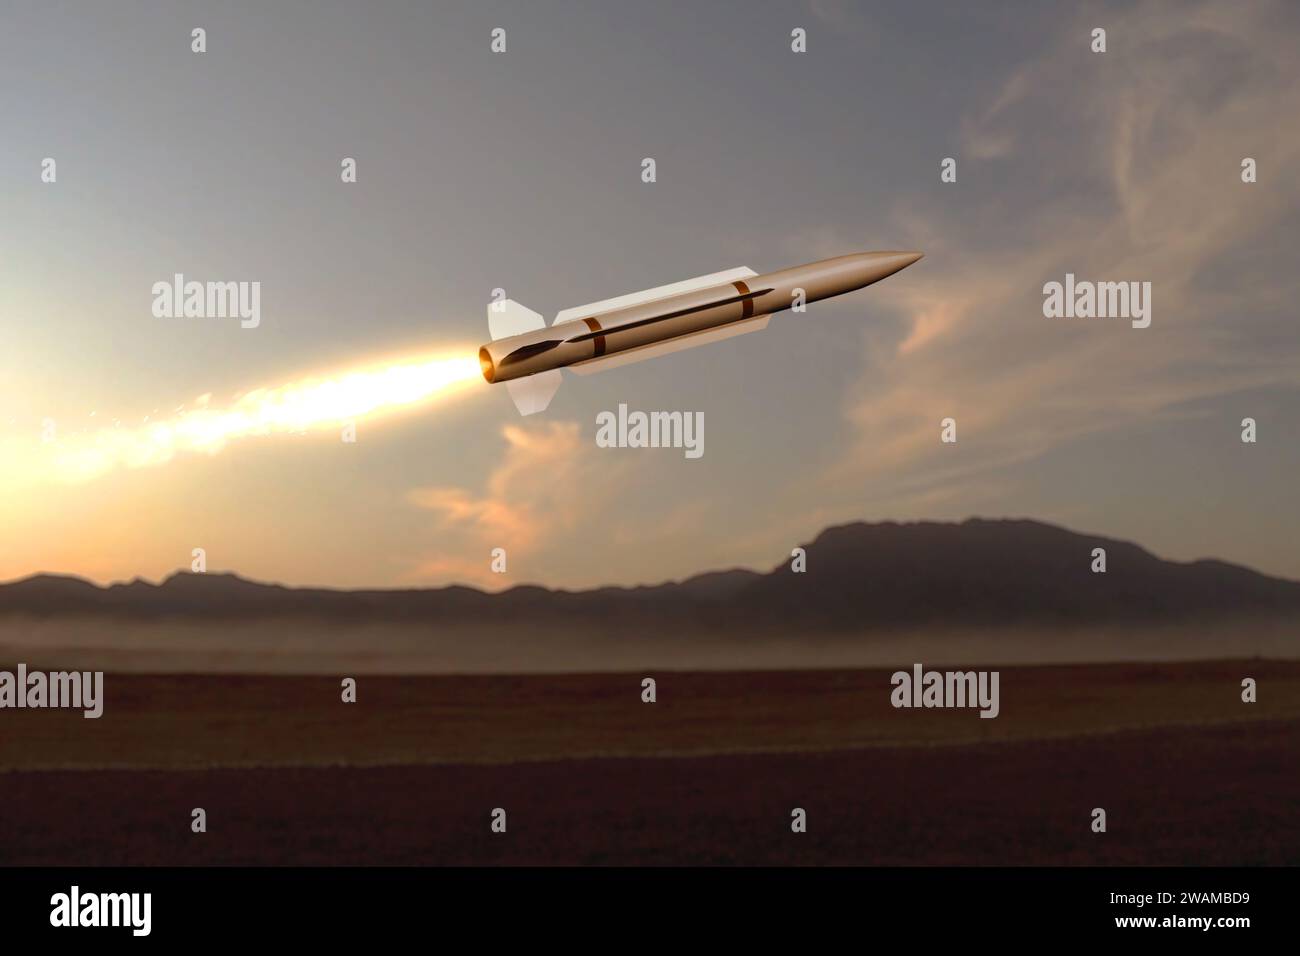 Military missile flies against a background of mountains and desert, smoke and fire. Concept: missile attack at sunrise, preemptive strike, war in the Stock Photo